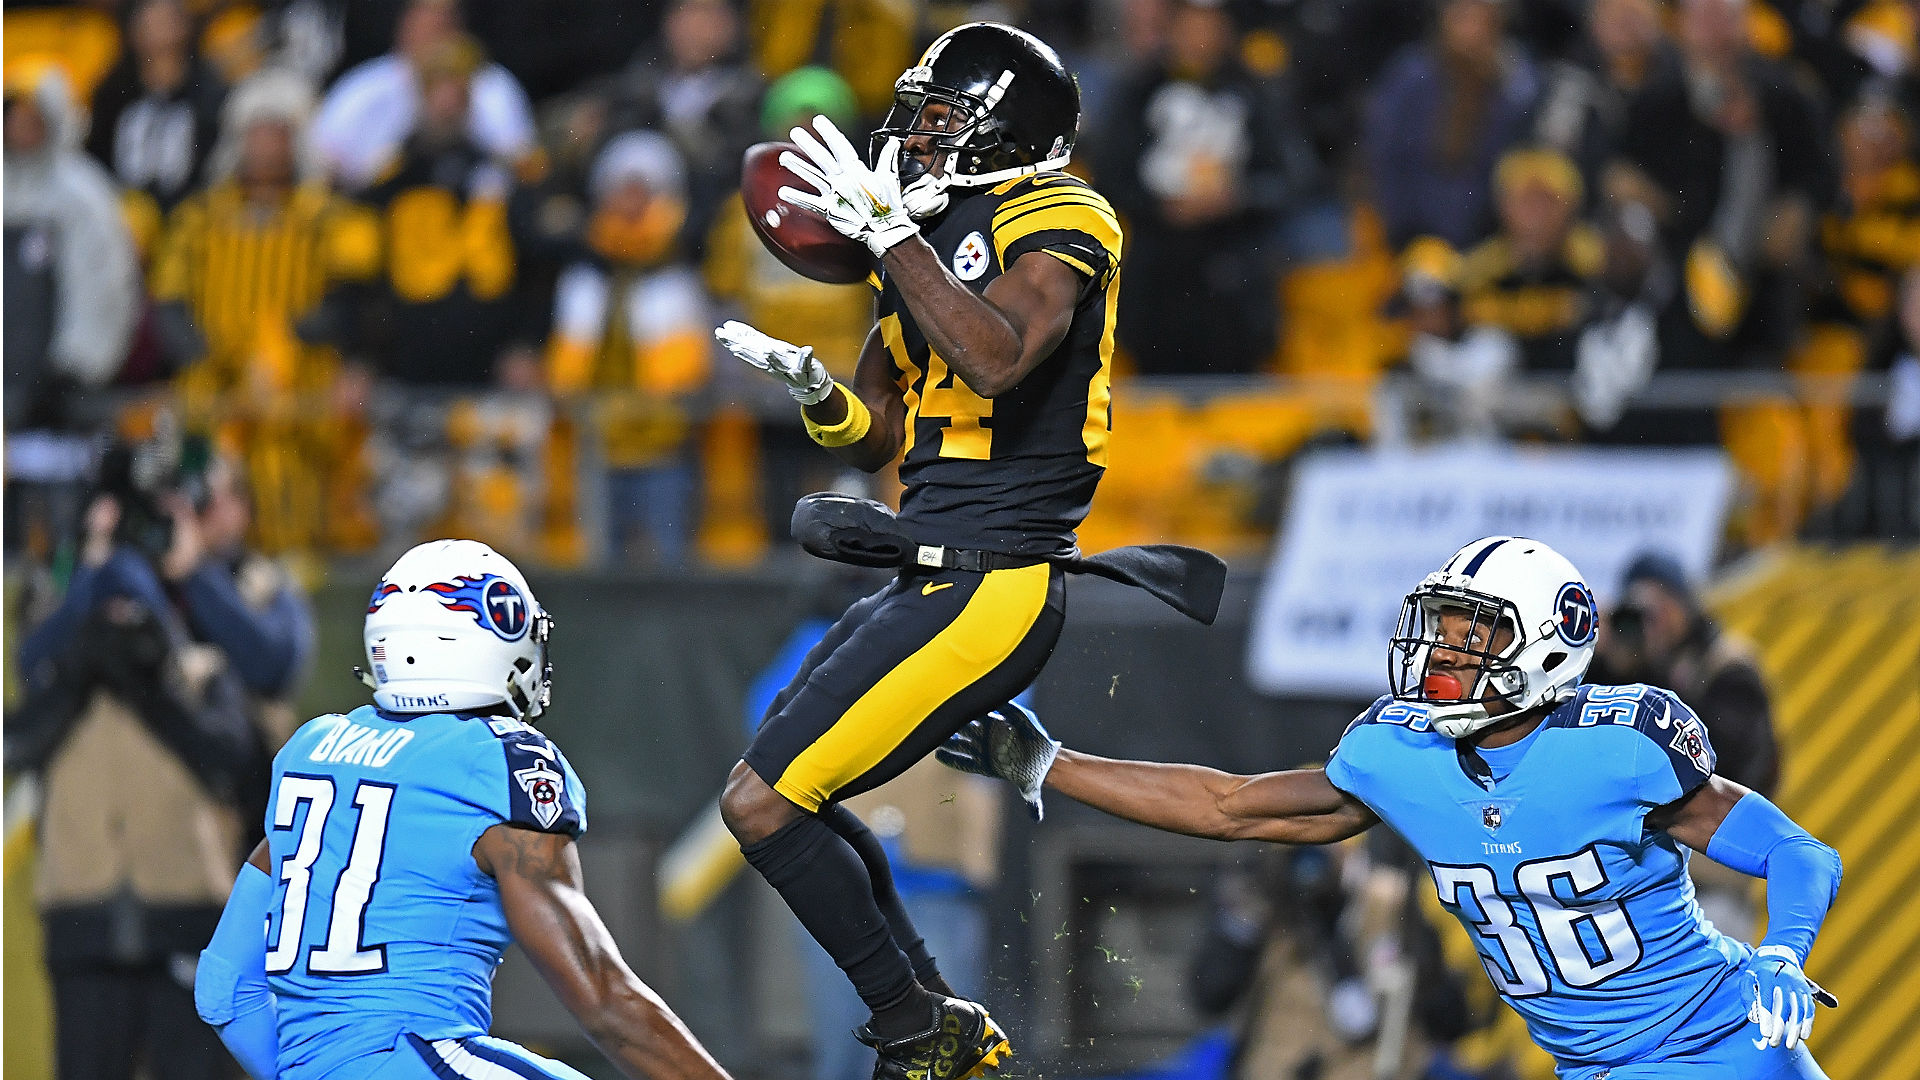 Titans vs. Steelers Score, results, highlights from Thursday night